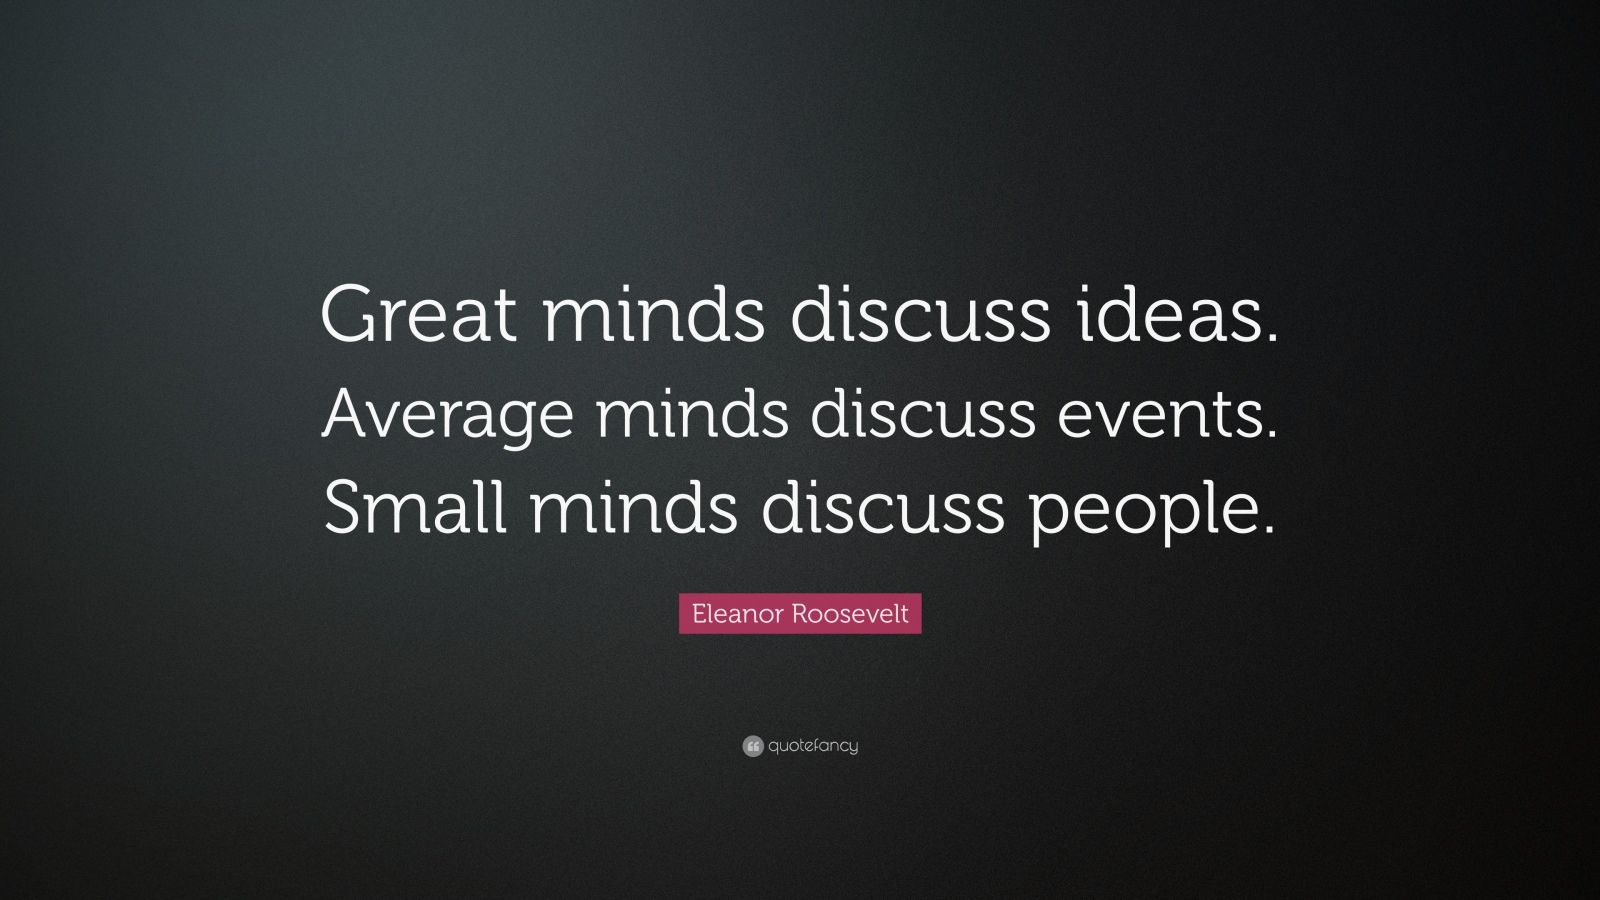 Eleanor Roosevelt Quotes Great Minds